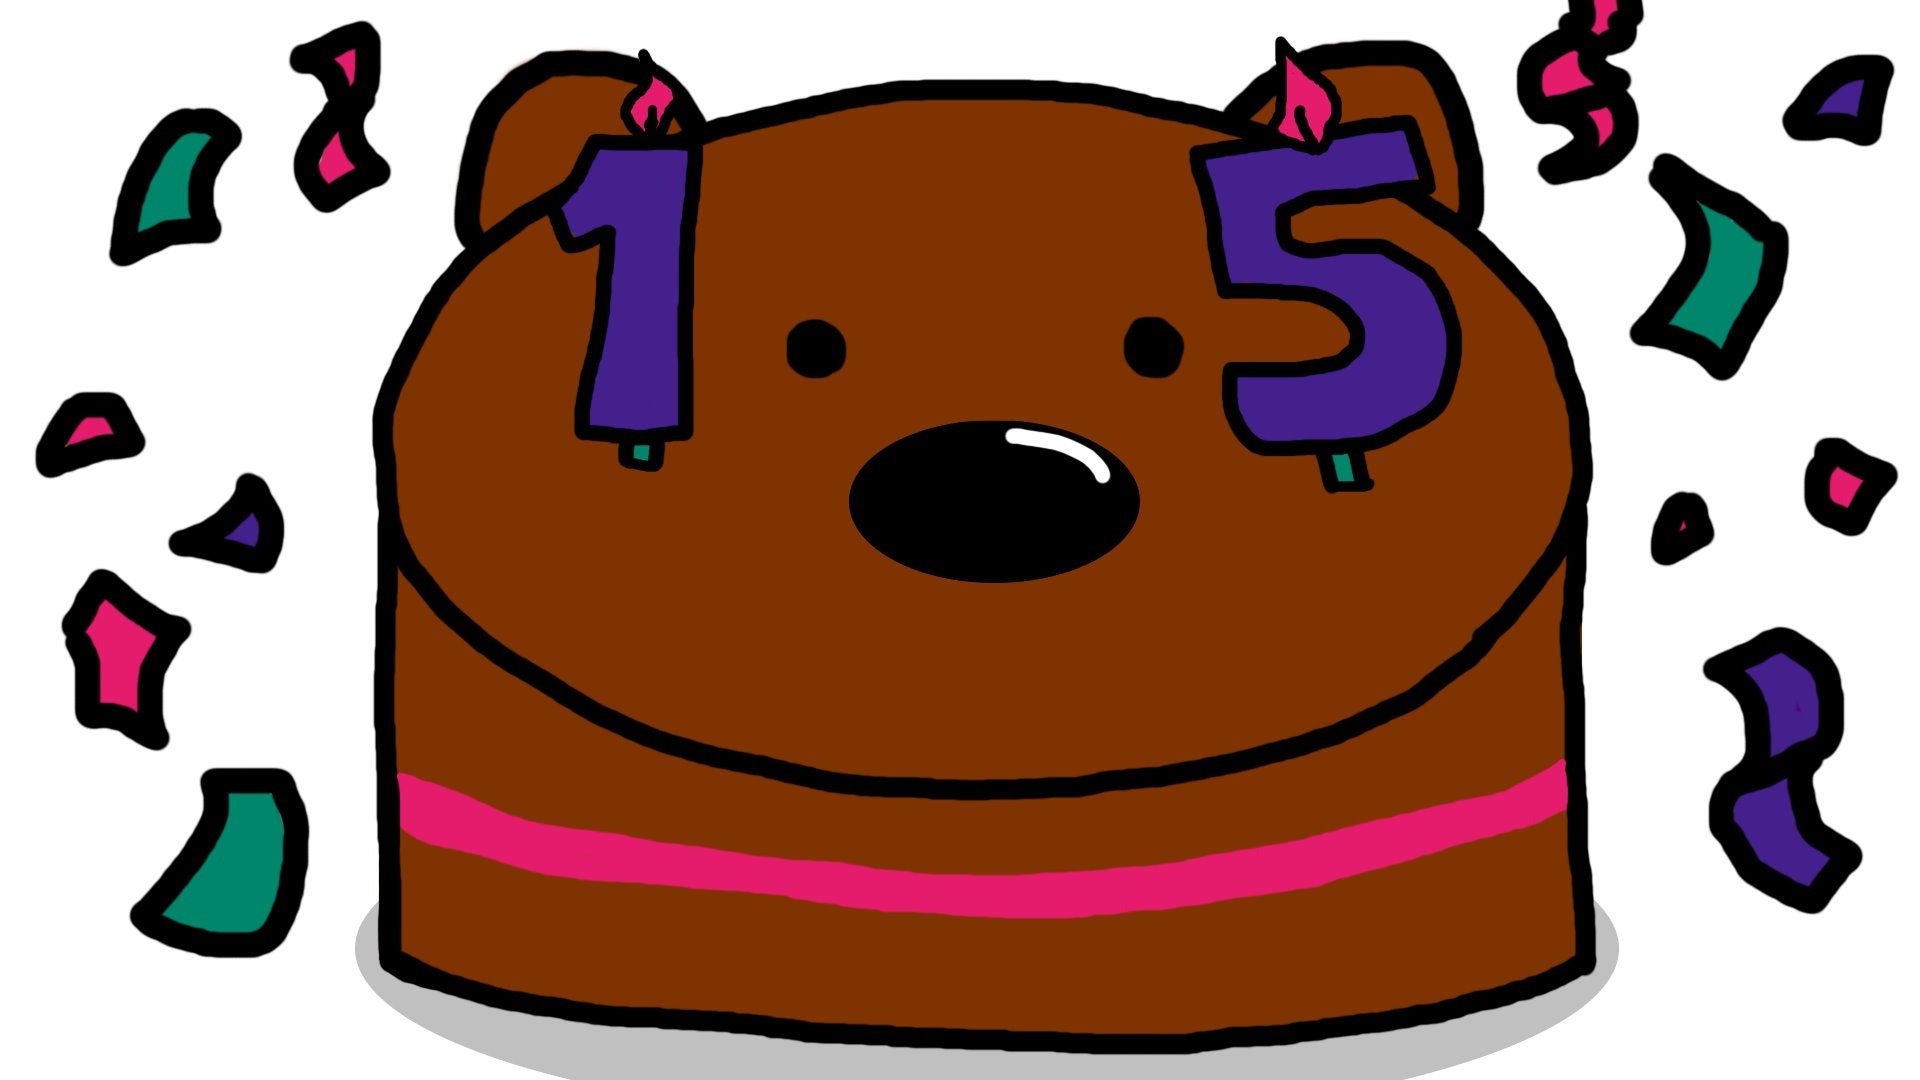 A hand drawn image of RPS mascot Horace as an endless bear cake.